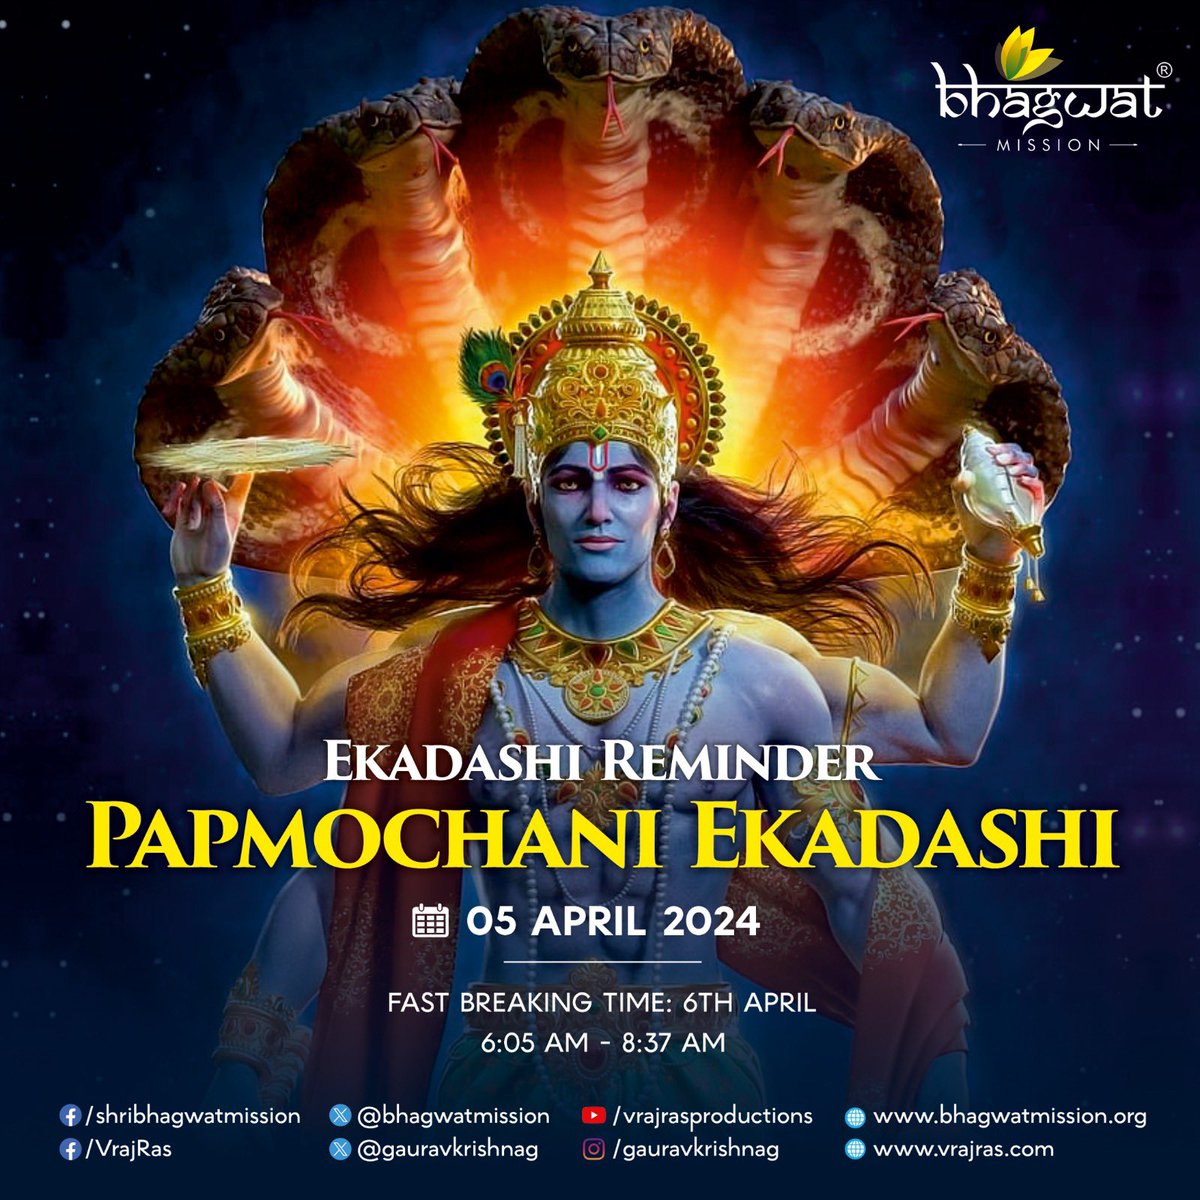 🔔Ekadashi Reminder🔔 Tomorrow is Papmochani Ekadashi, which means 'removal of sins'. May all of our misgivings - committed knowingly or unknowingly be removed through this pious fast. Shri Radhe! #Ekadashi